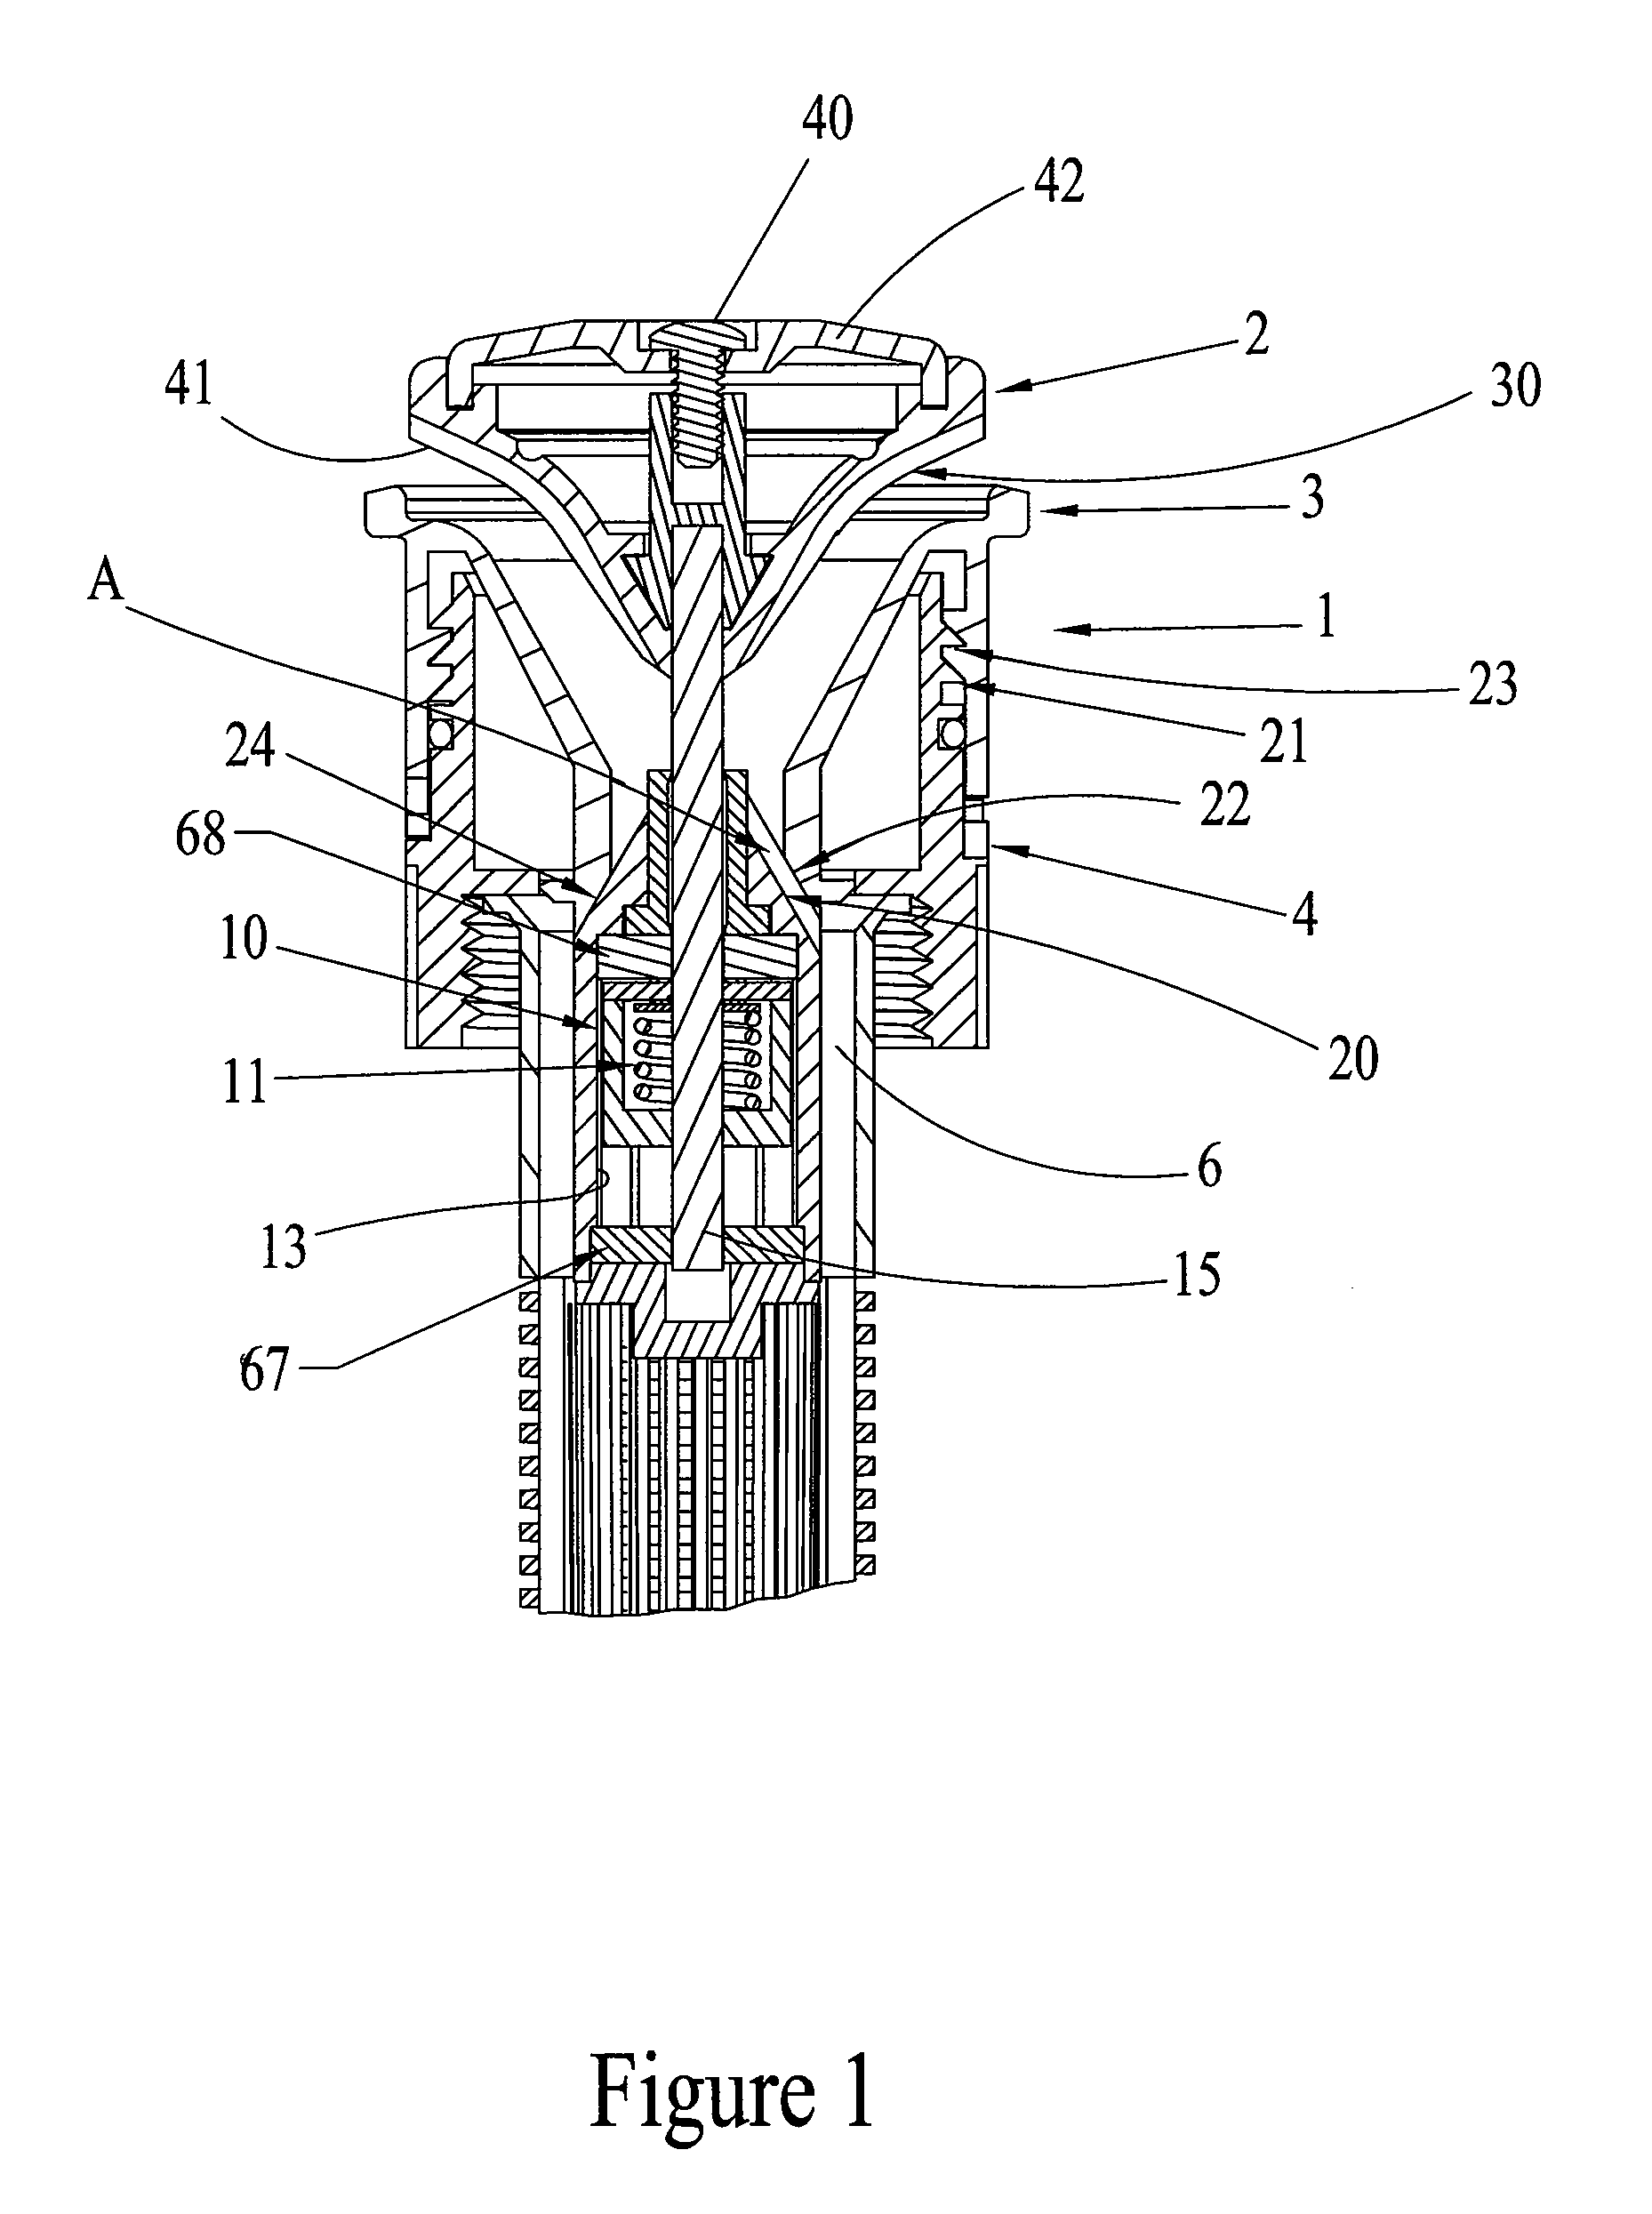 Sprinkler head nozzle assembly with adjustable arc, flow rate and stream angle